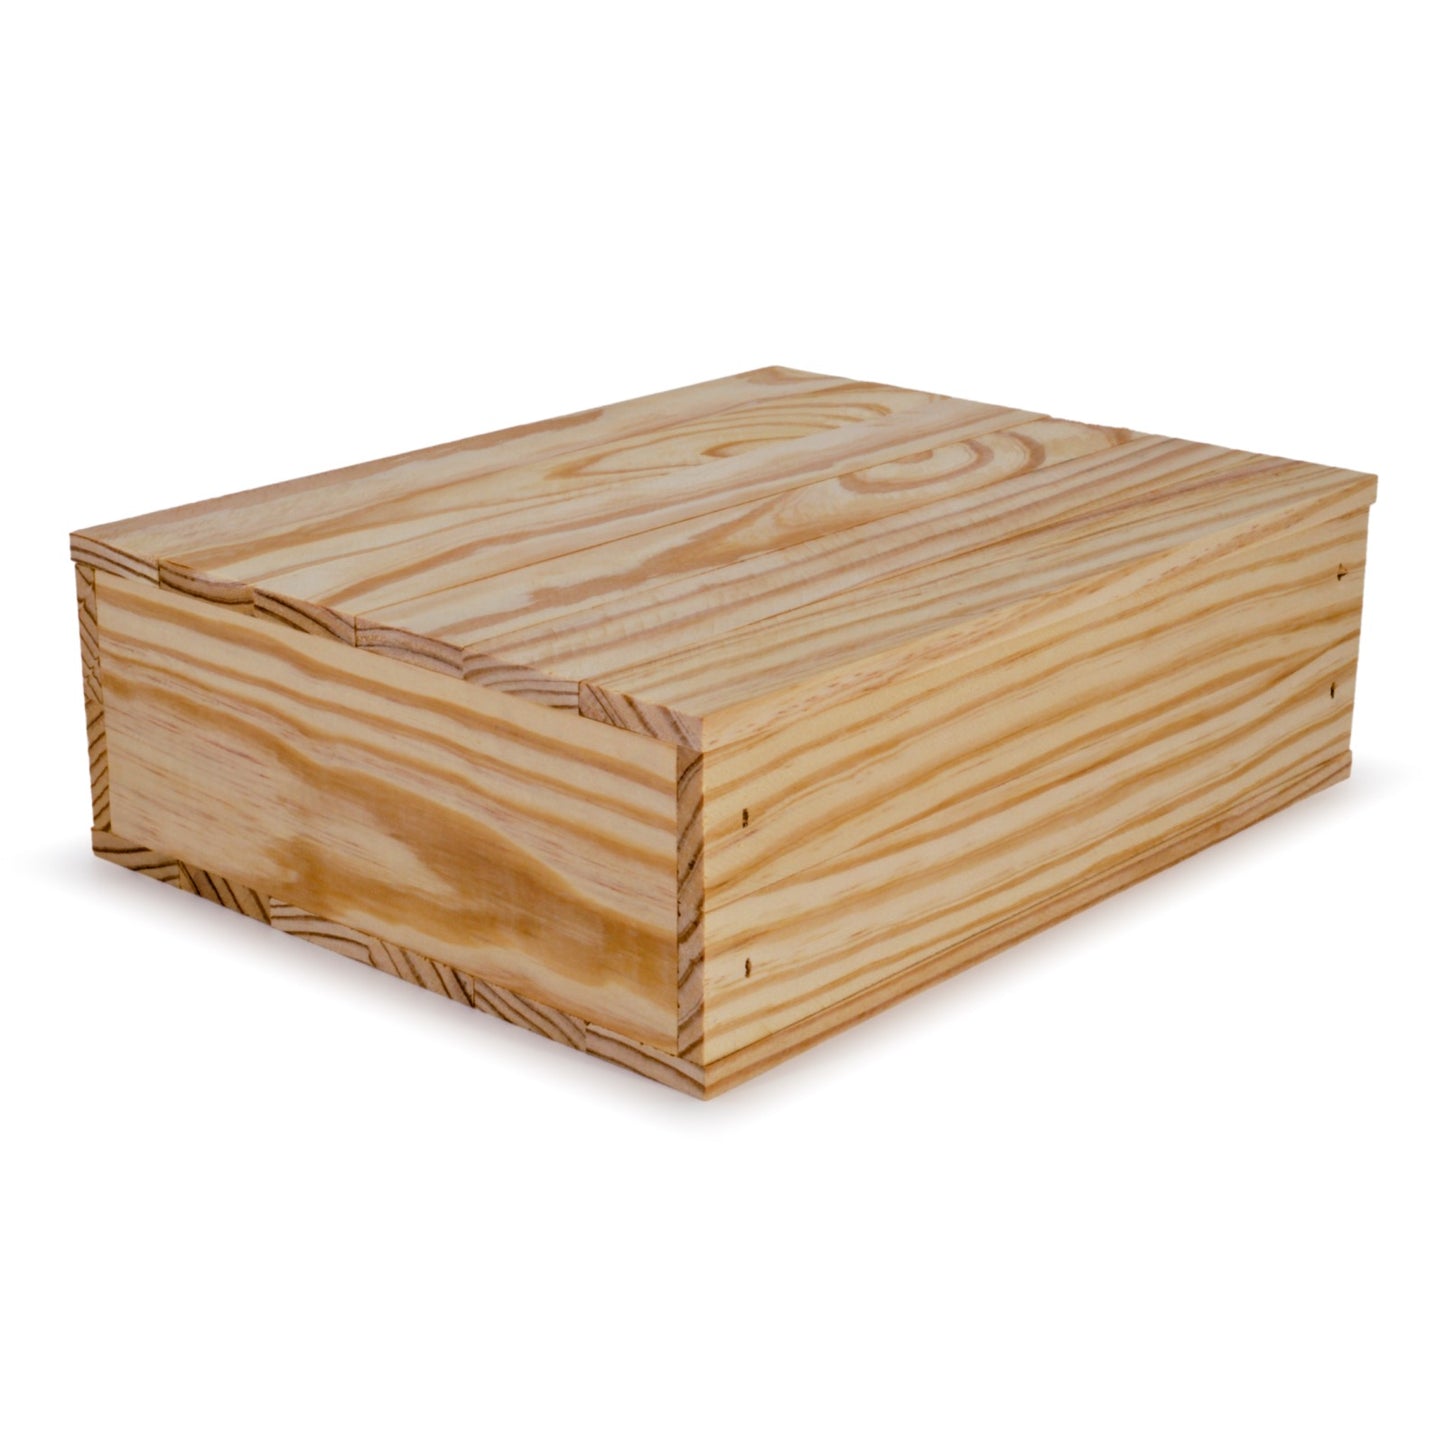 Small wooden crate with lid 12x9.75x3.5, 6-BX-12-9.75-3.5-NX-NW-LL, 12-BX-12-9.75-3.5-NX-NW-LL, 24-BX-12-9.75-3.5-NX-NW-LL, 48-BX-12-9.75-3.5-NX-NW-LL, 96-BX-12-9.75-3.5-NX-NW-LL